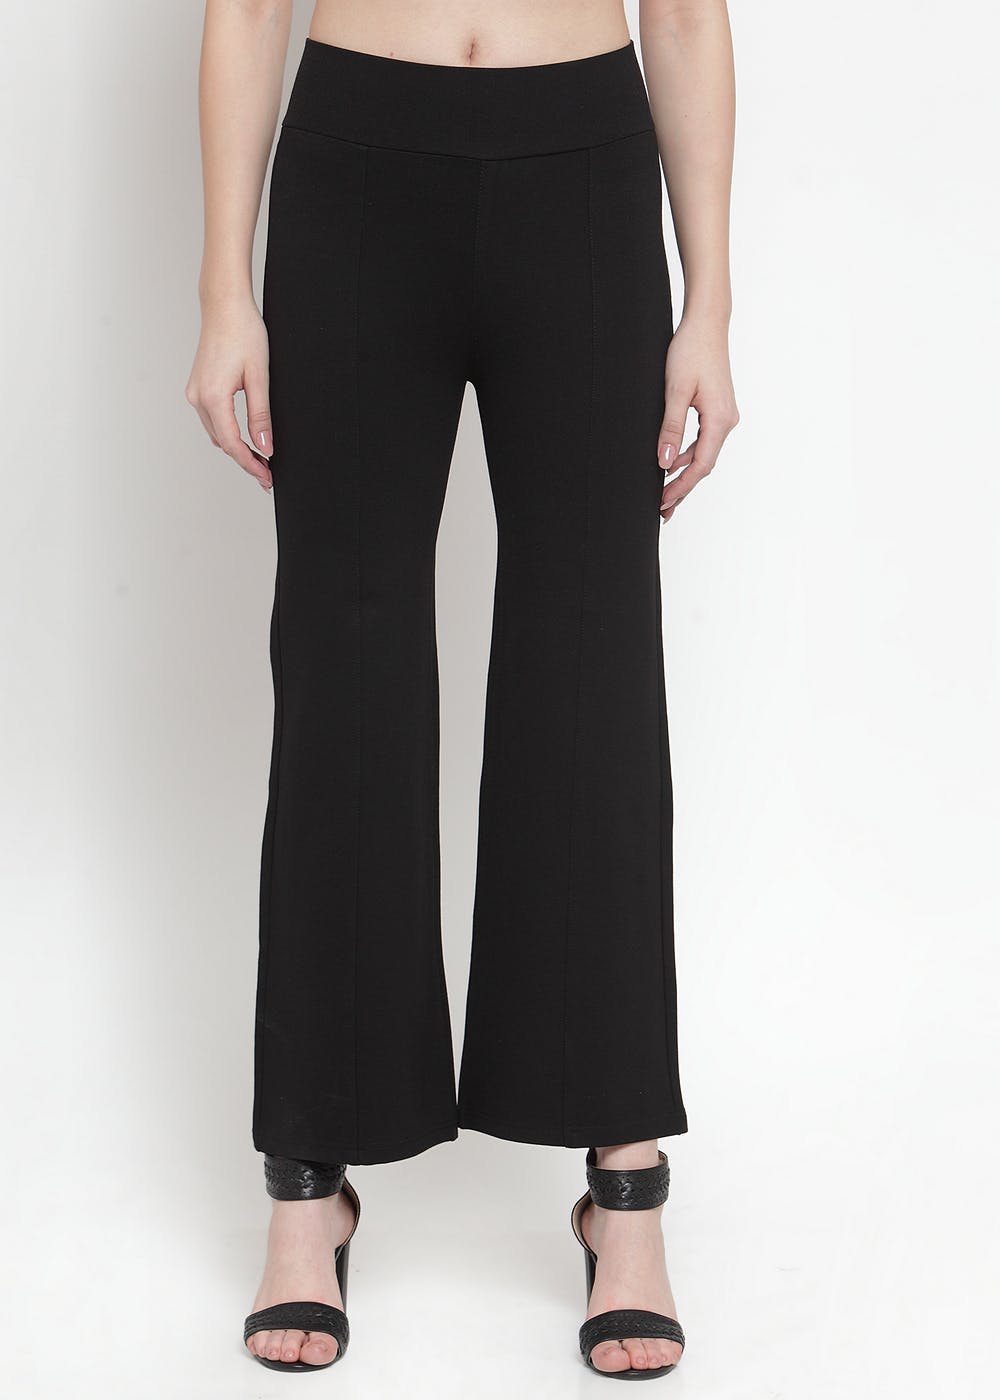 Get Solid Black Flared Legged Trousers at ₹ 1079 | LBB Shop